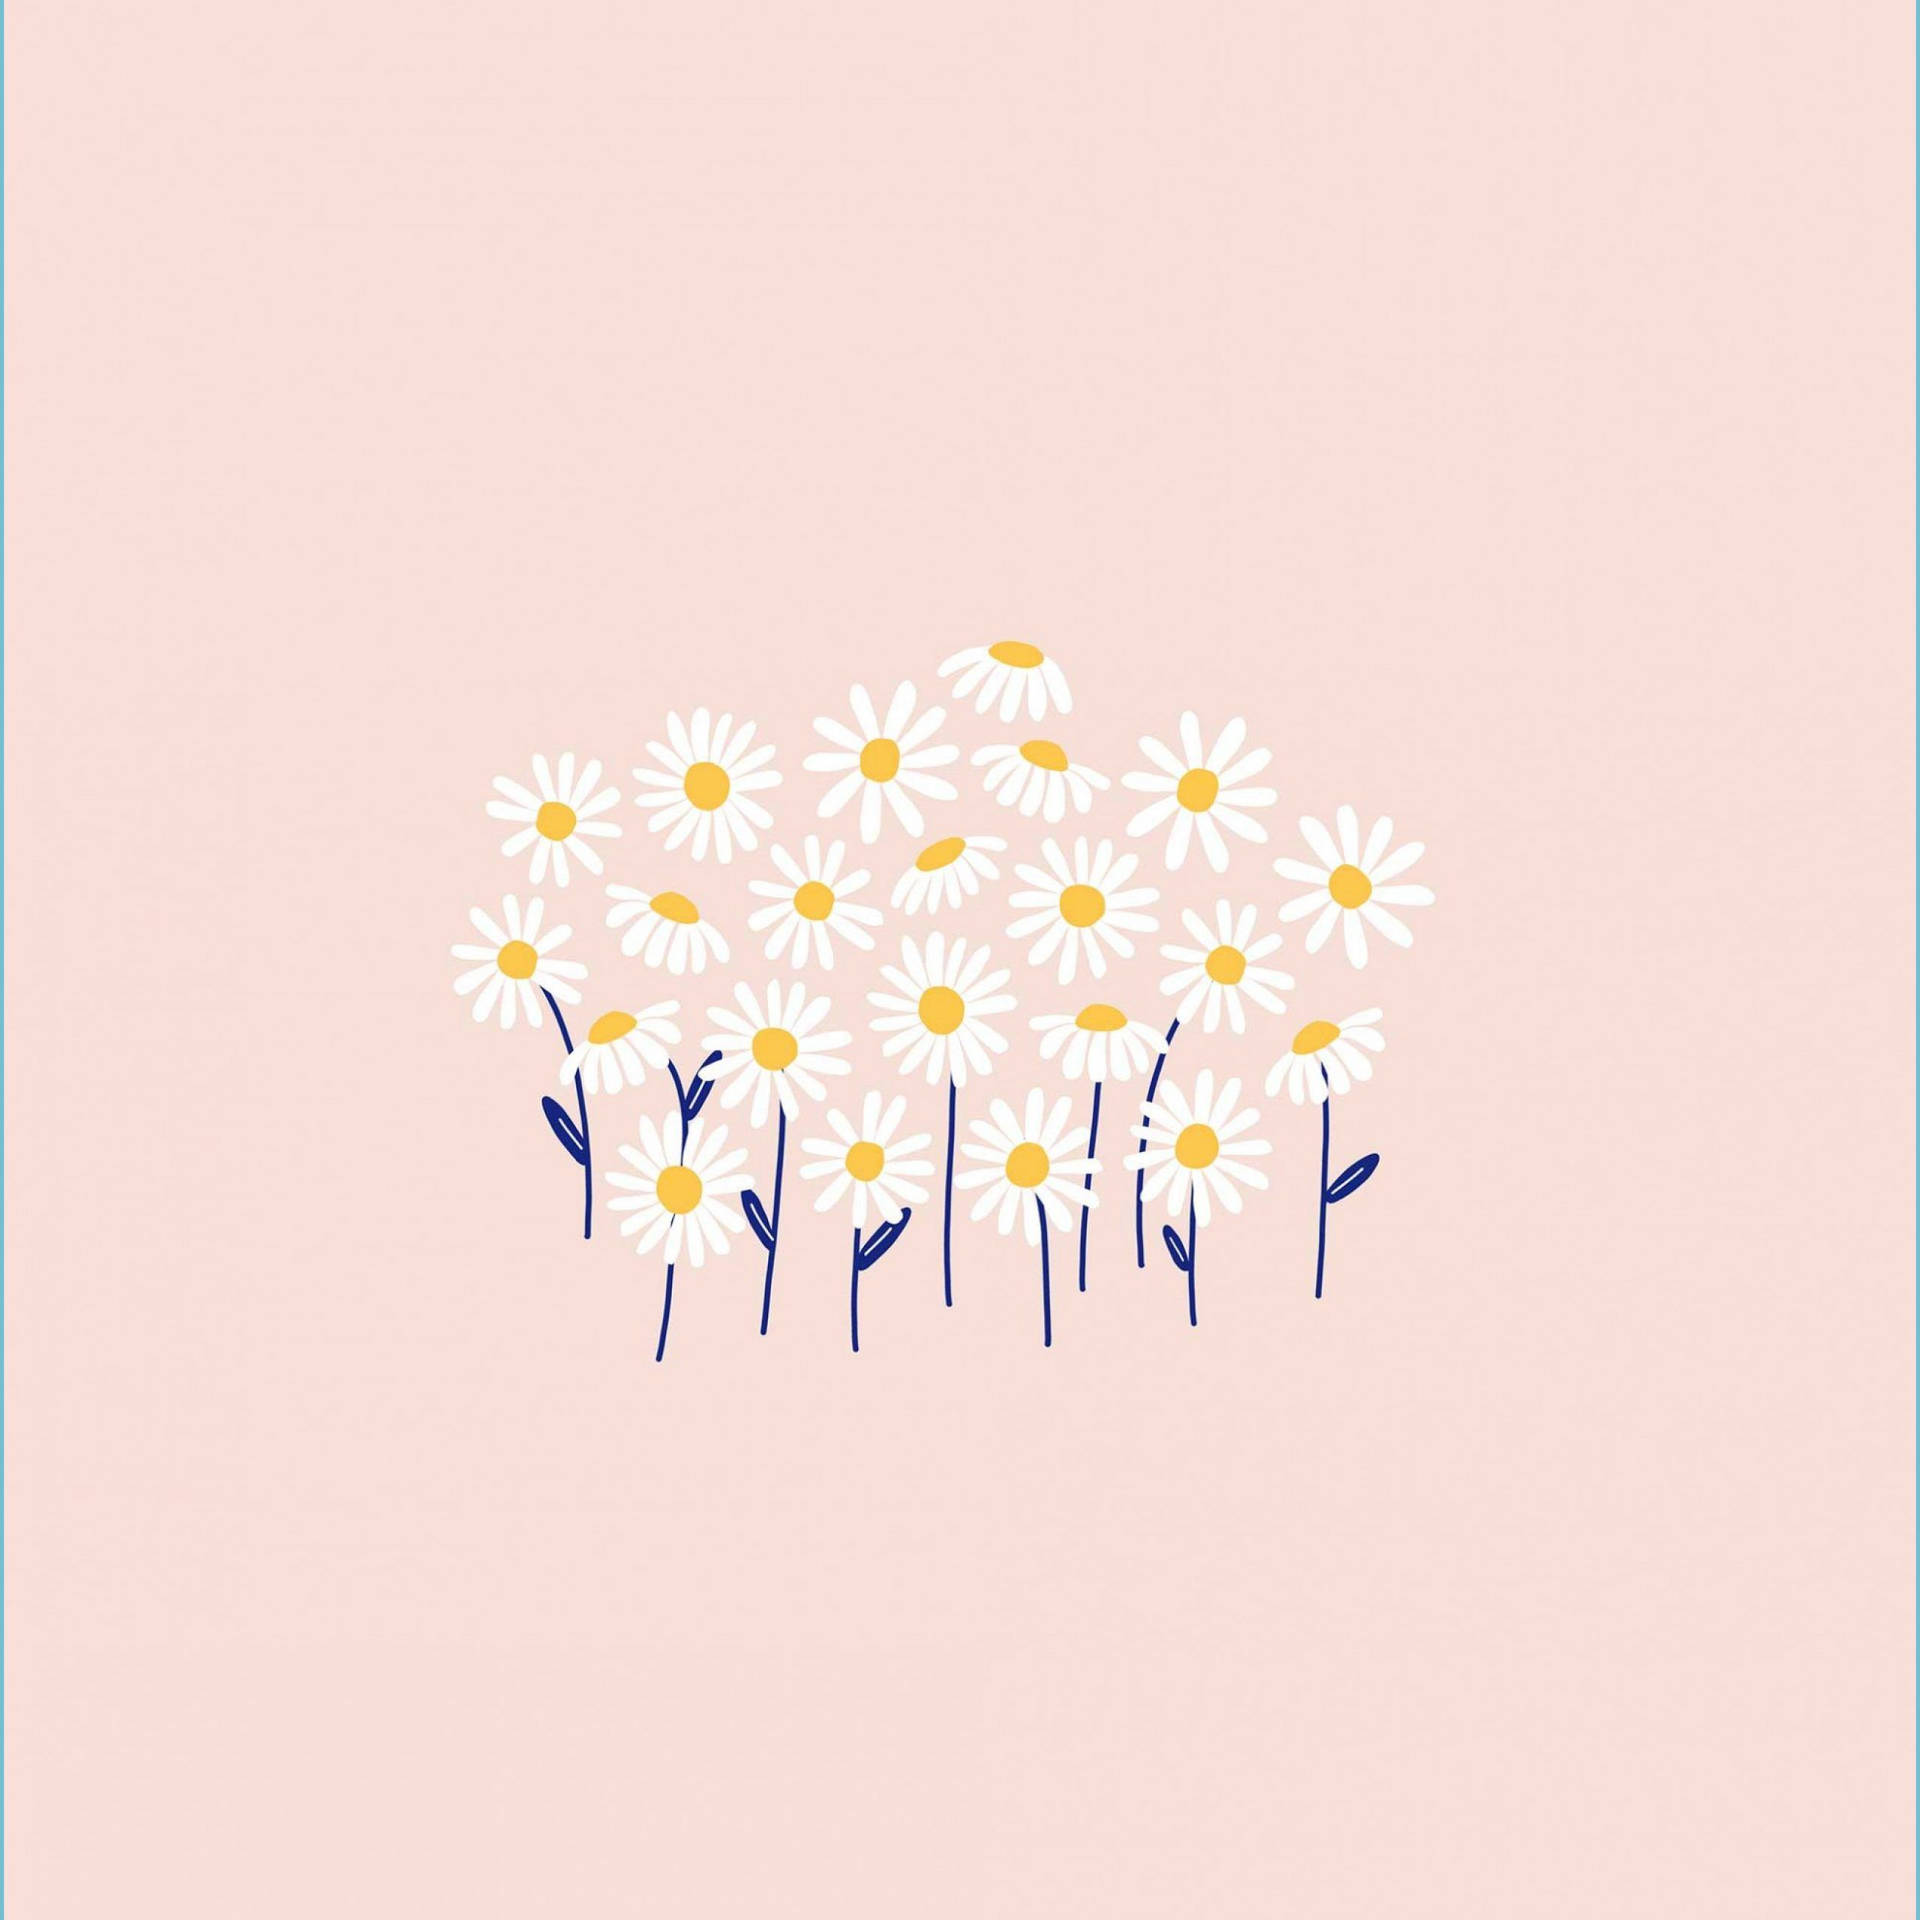 White Daisy On Pink Pastel Wallpaper